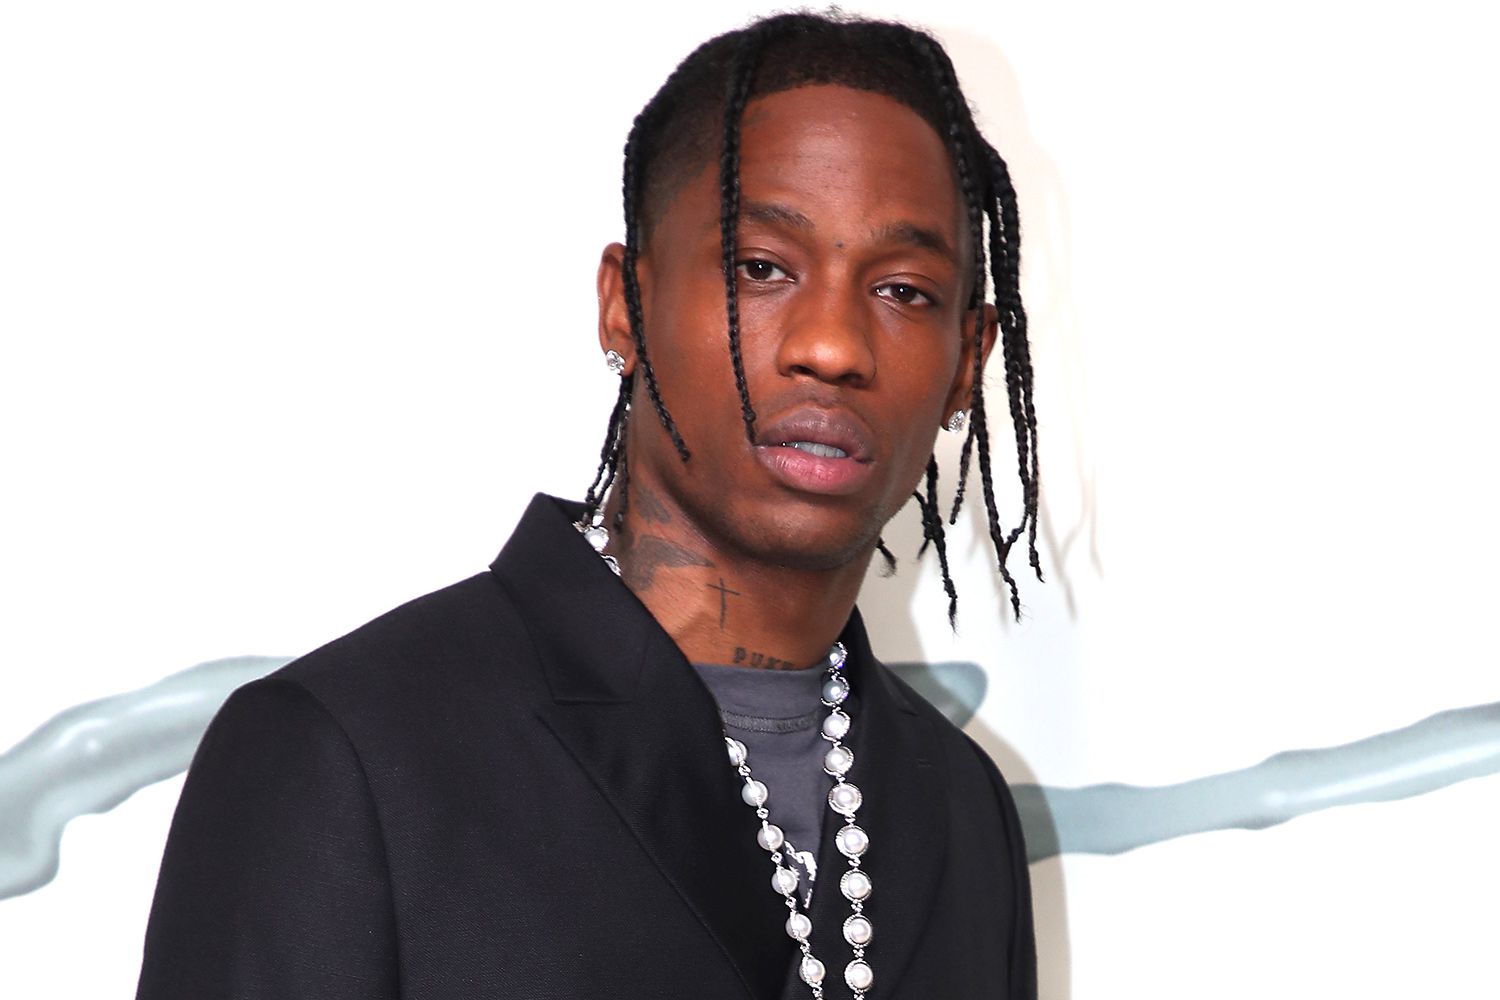 Why does travis scott never look at the camera?